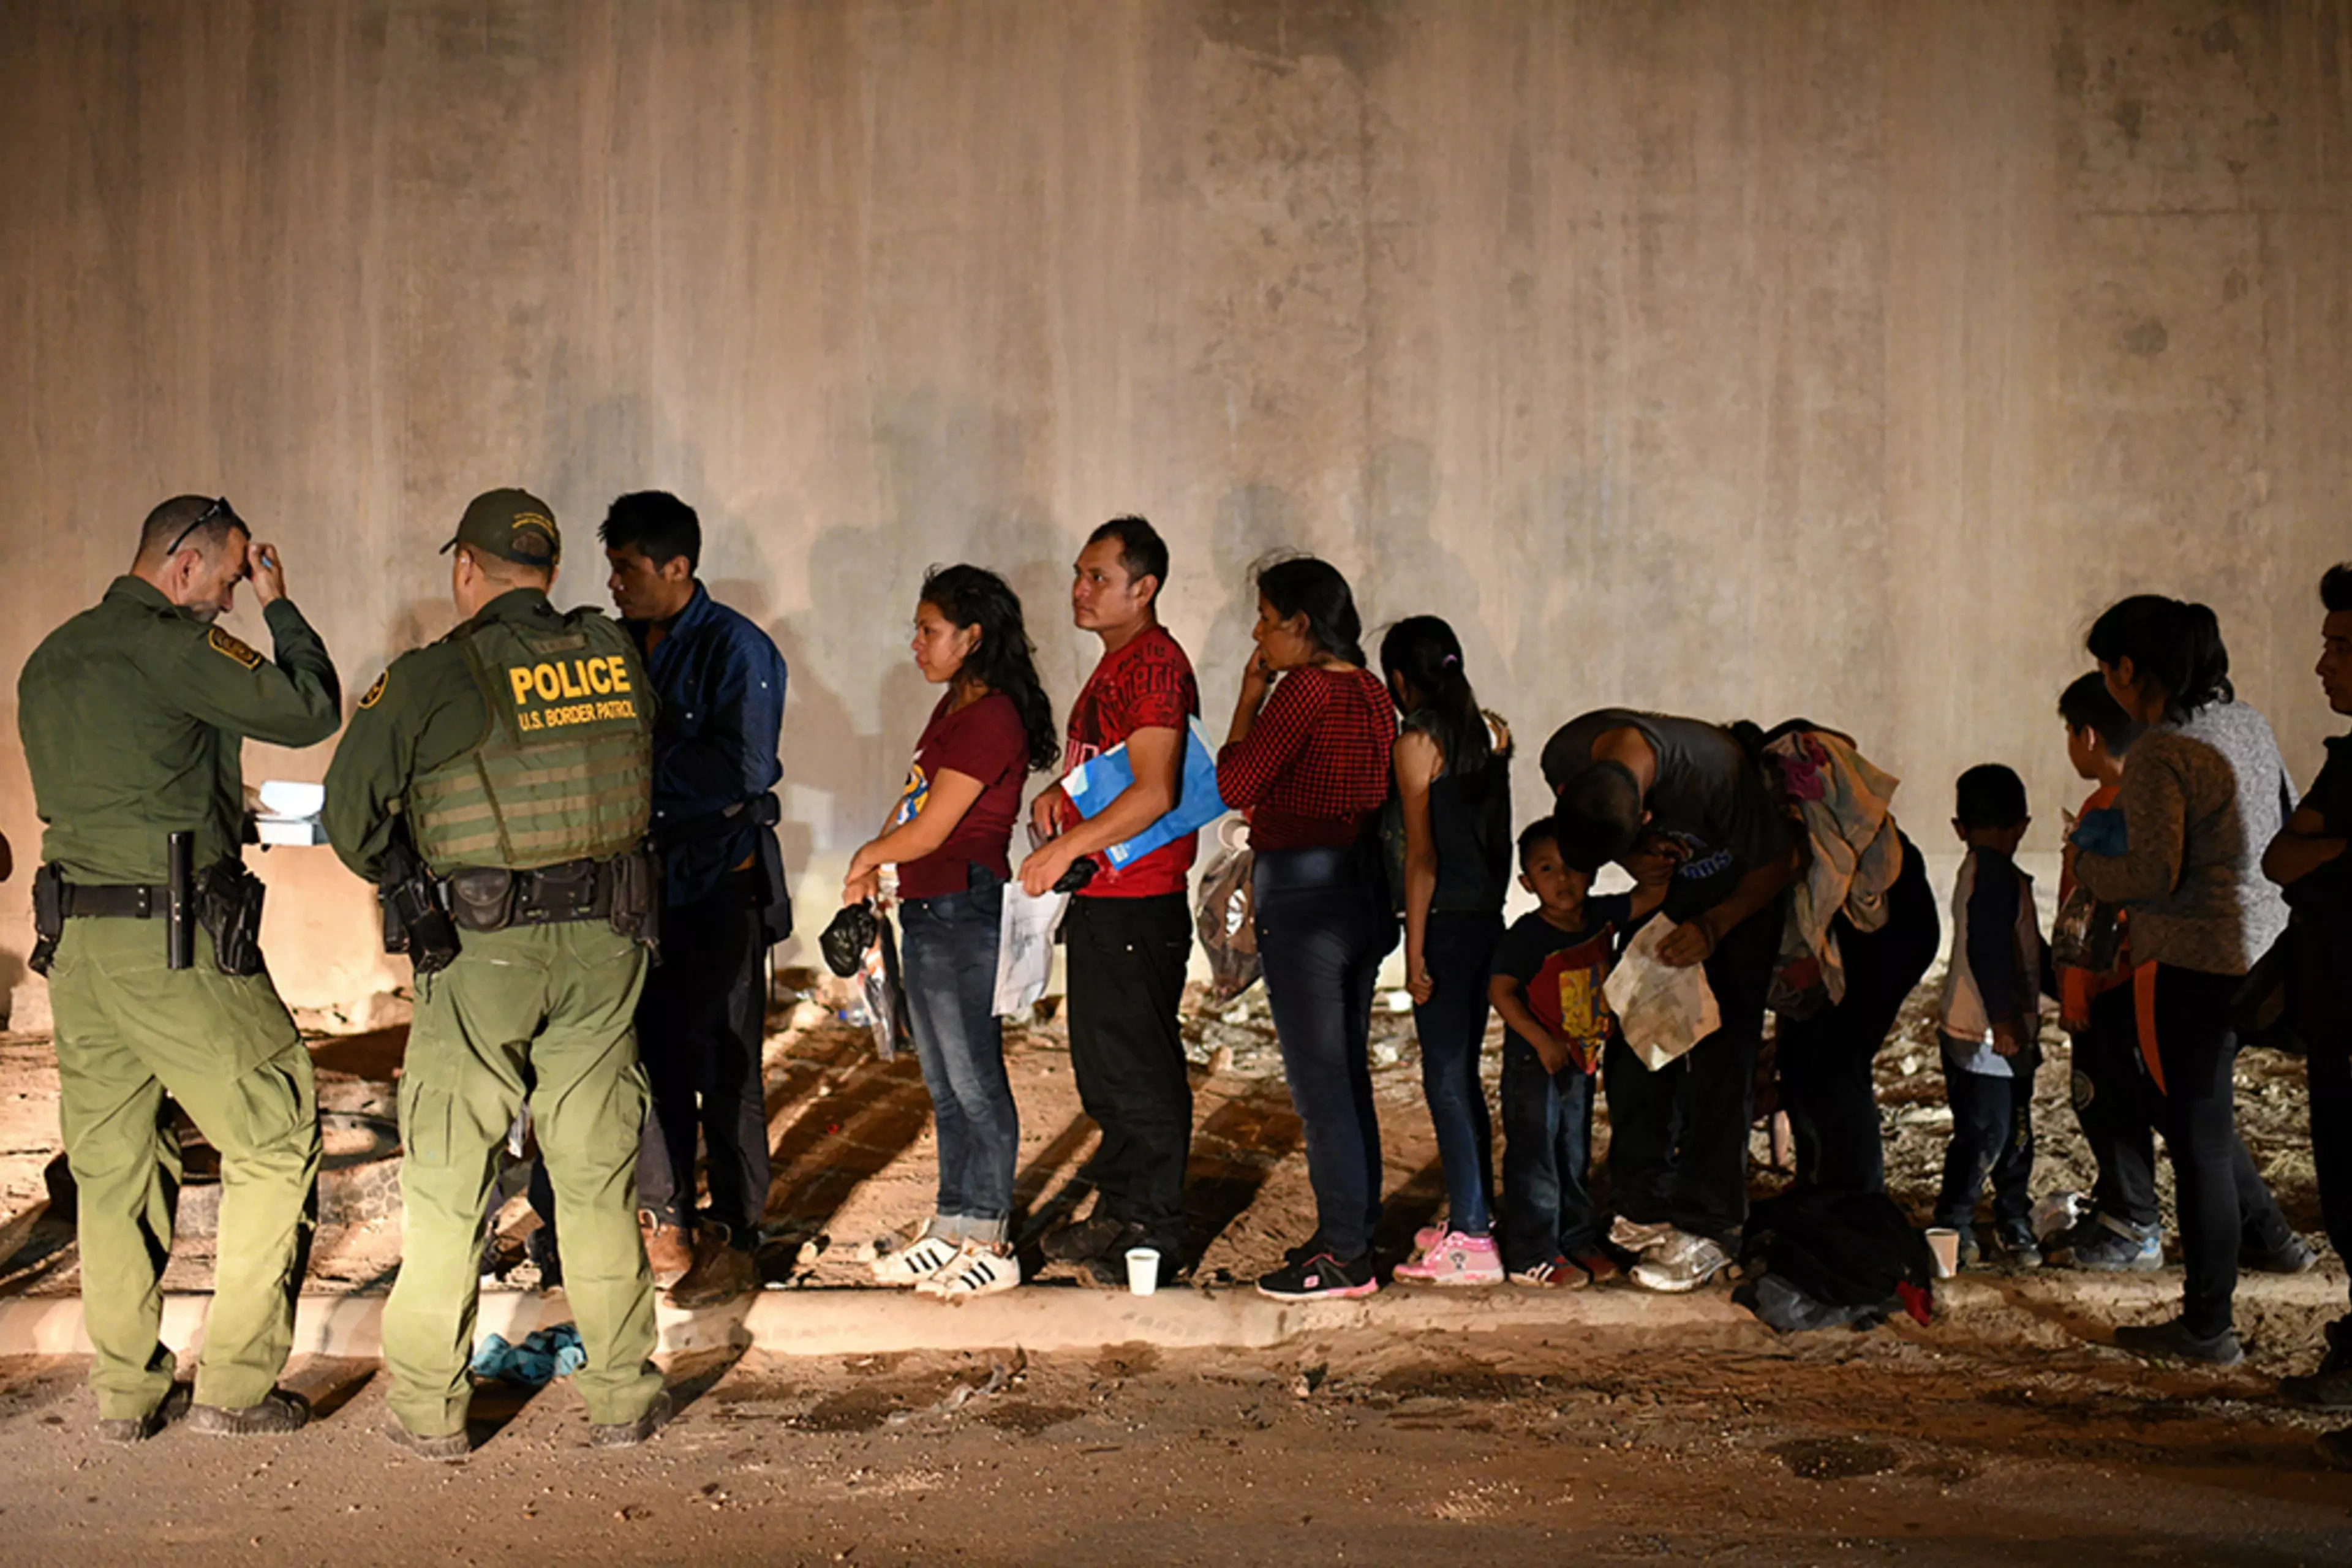 Migrants wait in line to seek asylum after illegally entering the United States in Hidalgo, Texas.